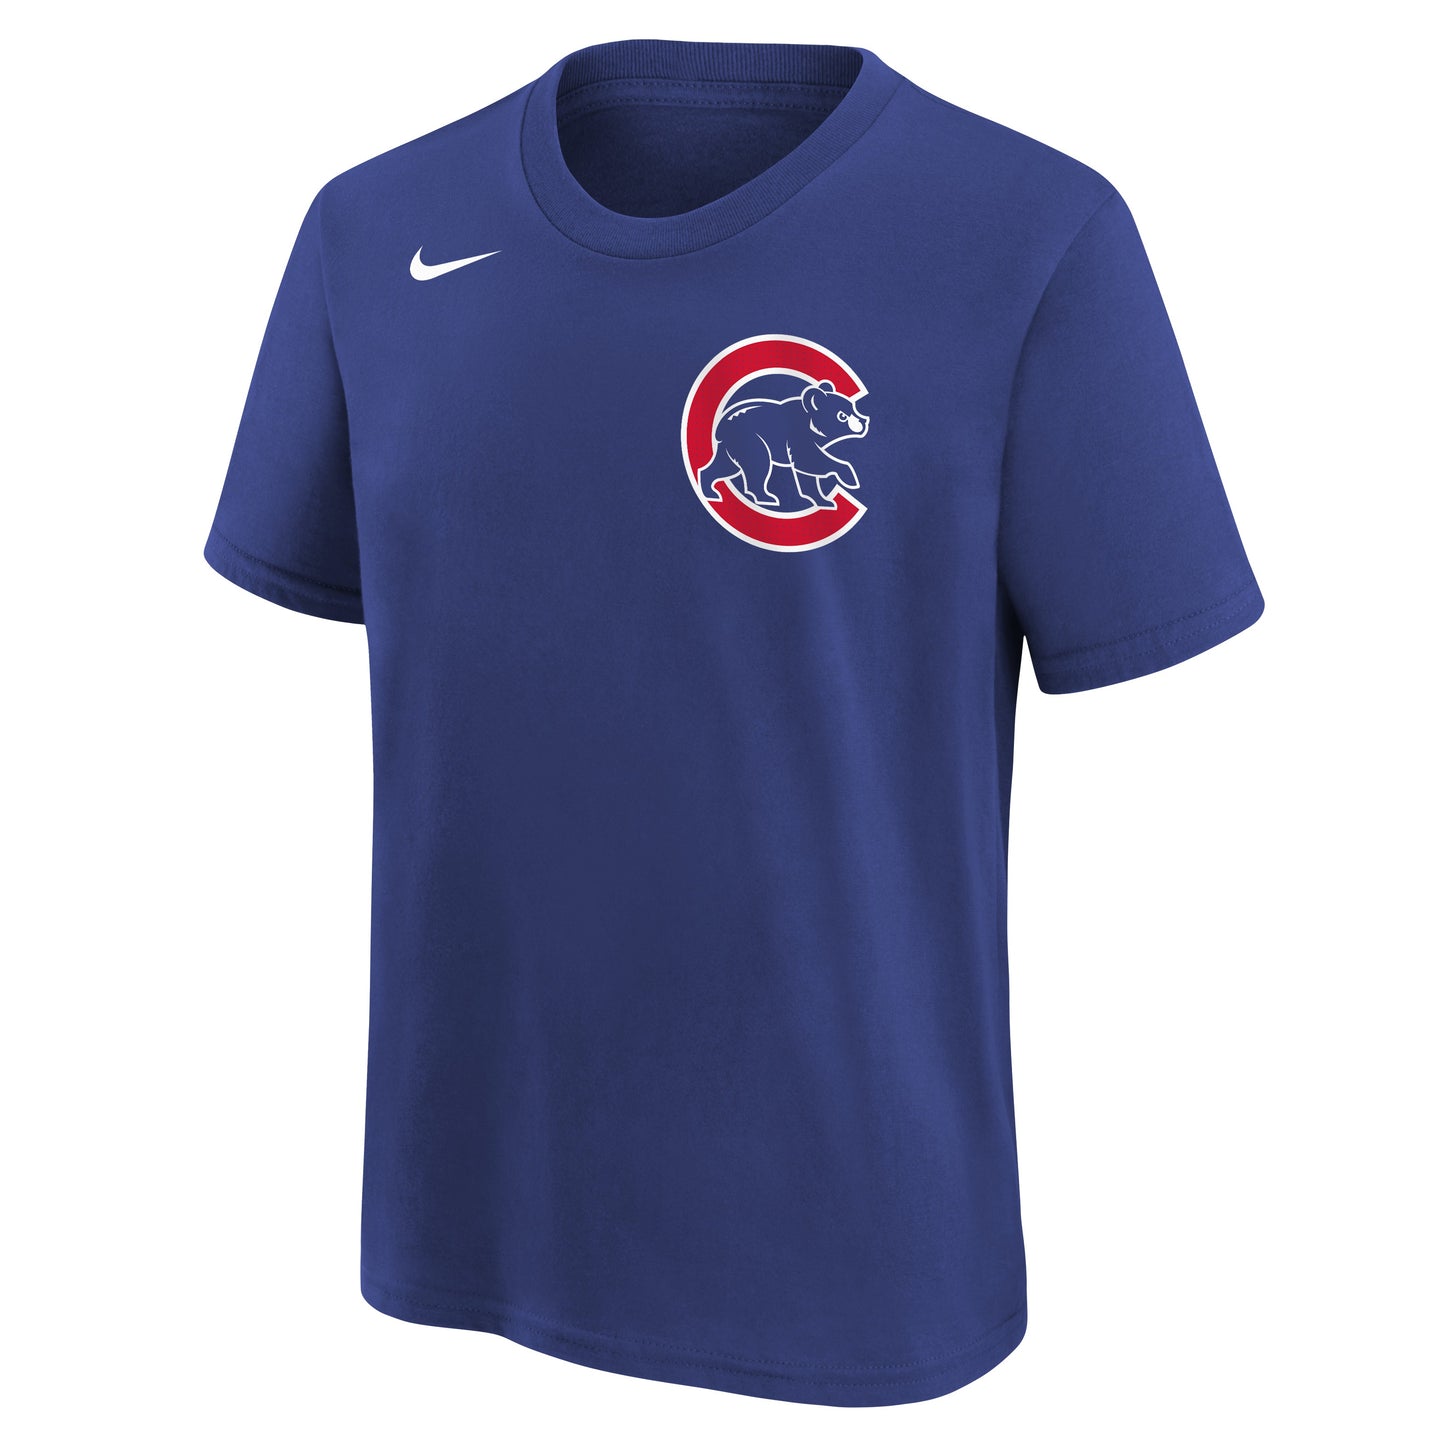 Youth Chicago Cubs Dansby Swanson Nike FUSE Royal Blue Name & Number T-Shirt